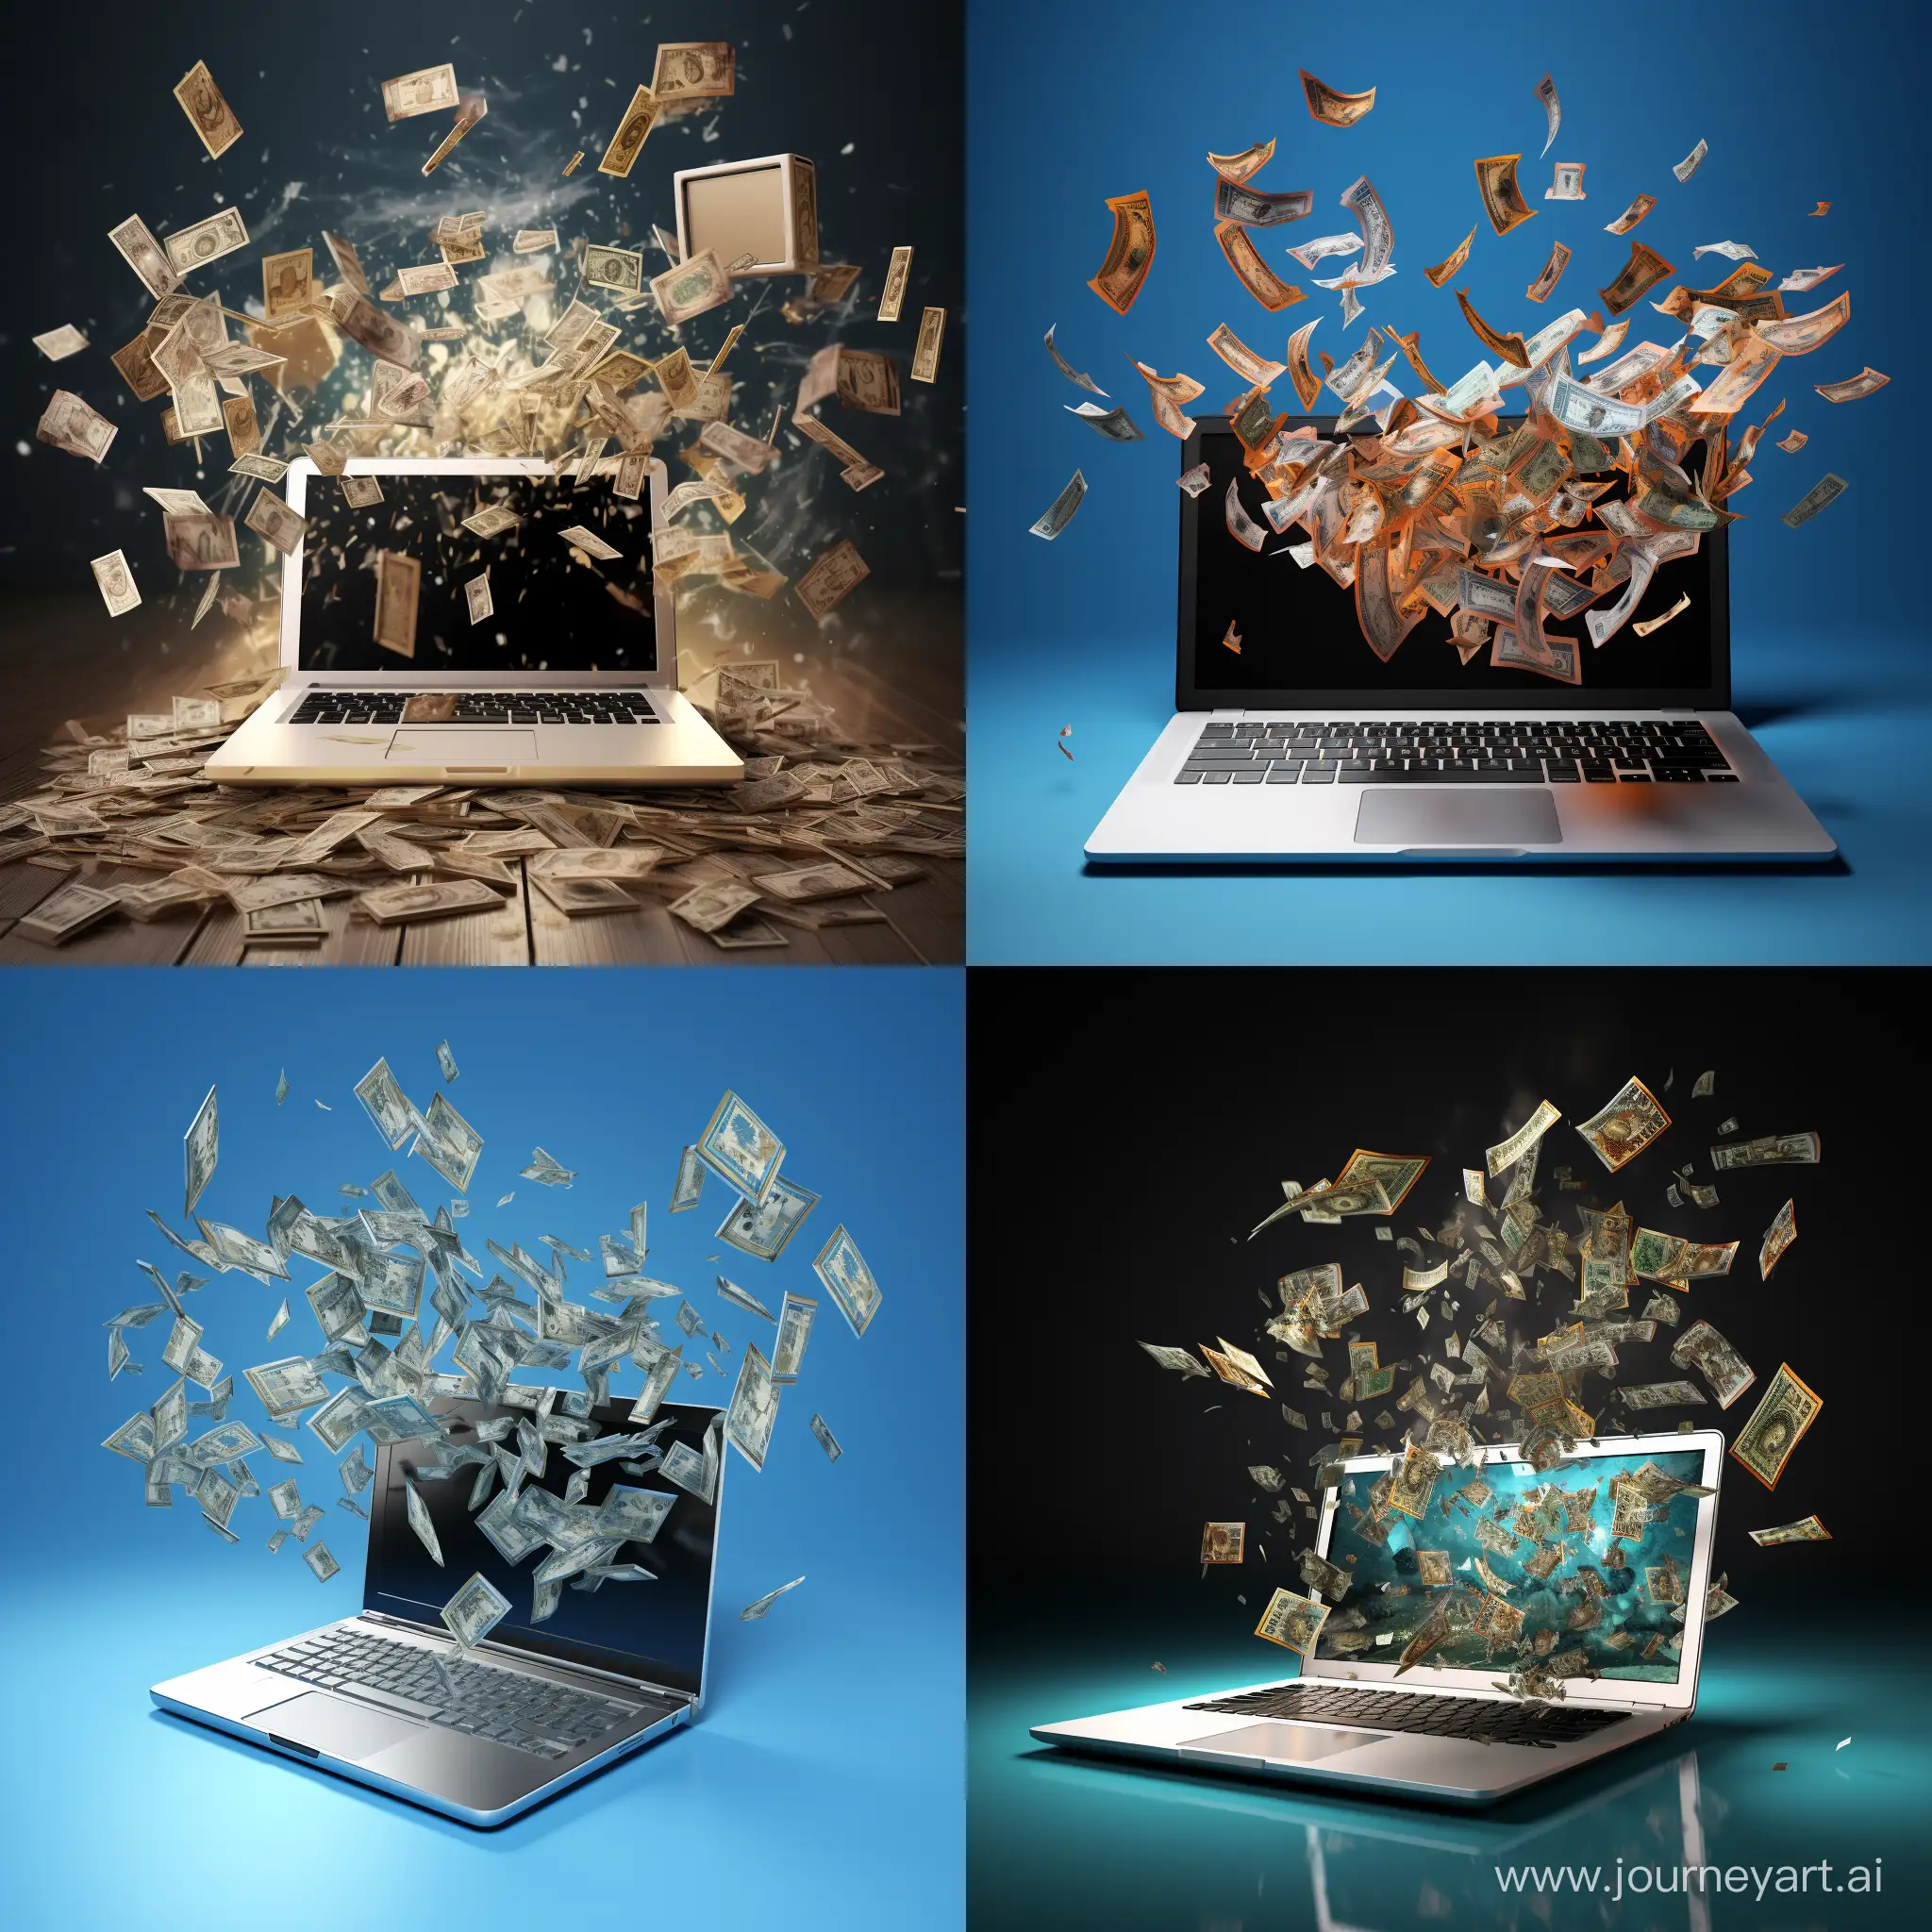 Flying-Dollars-Emanating-from-an-Open-Laptop-Realistic-Money-Concept